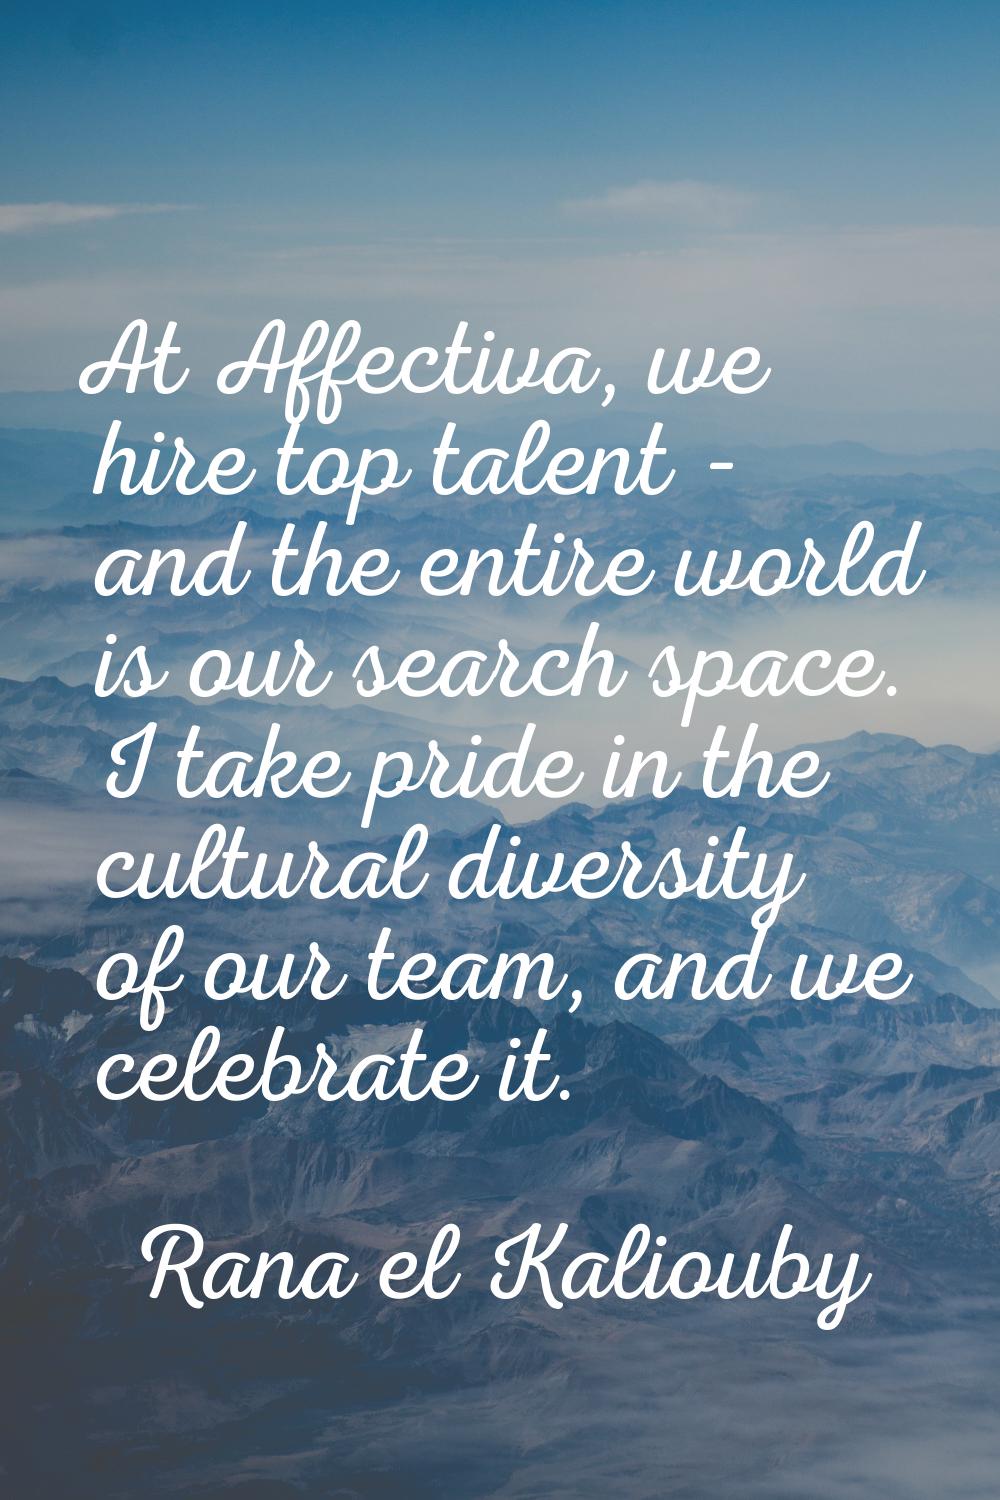 At Affectiva, we hire top talent - and the entire world is our search space. I take pride in the cu